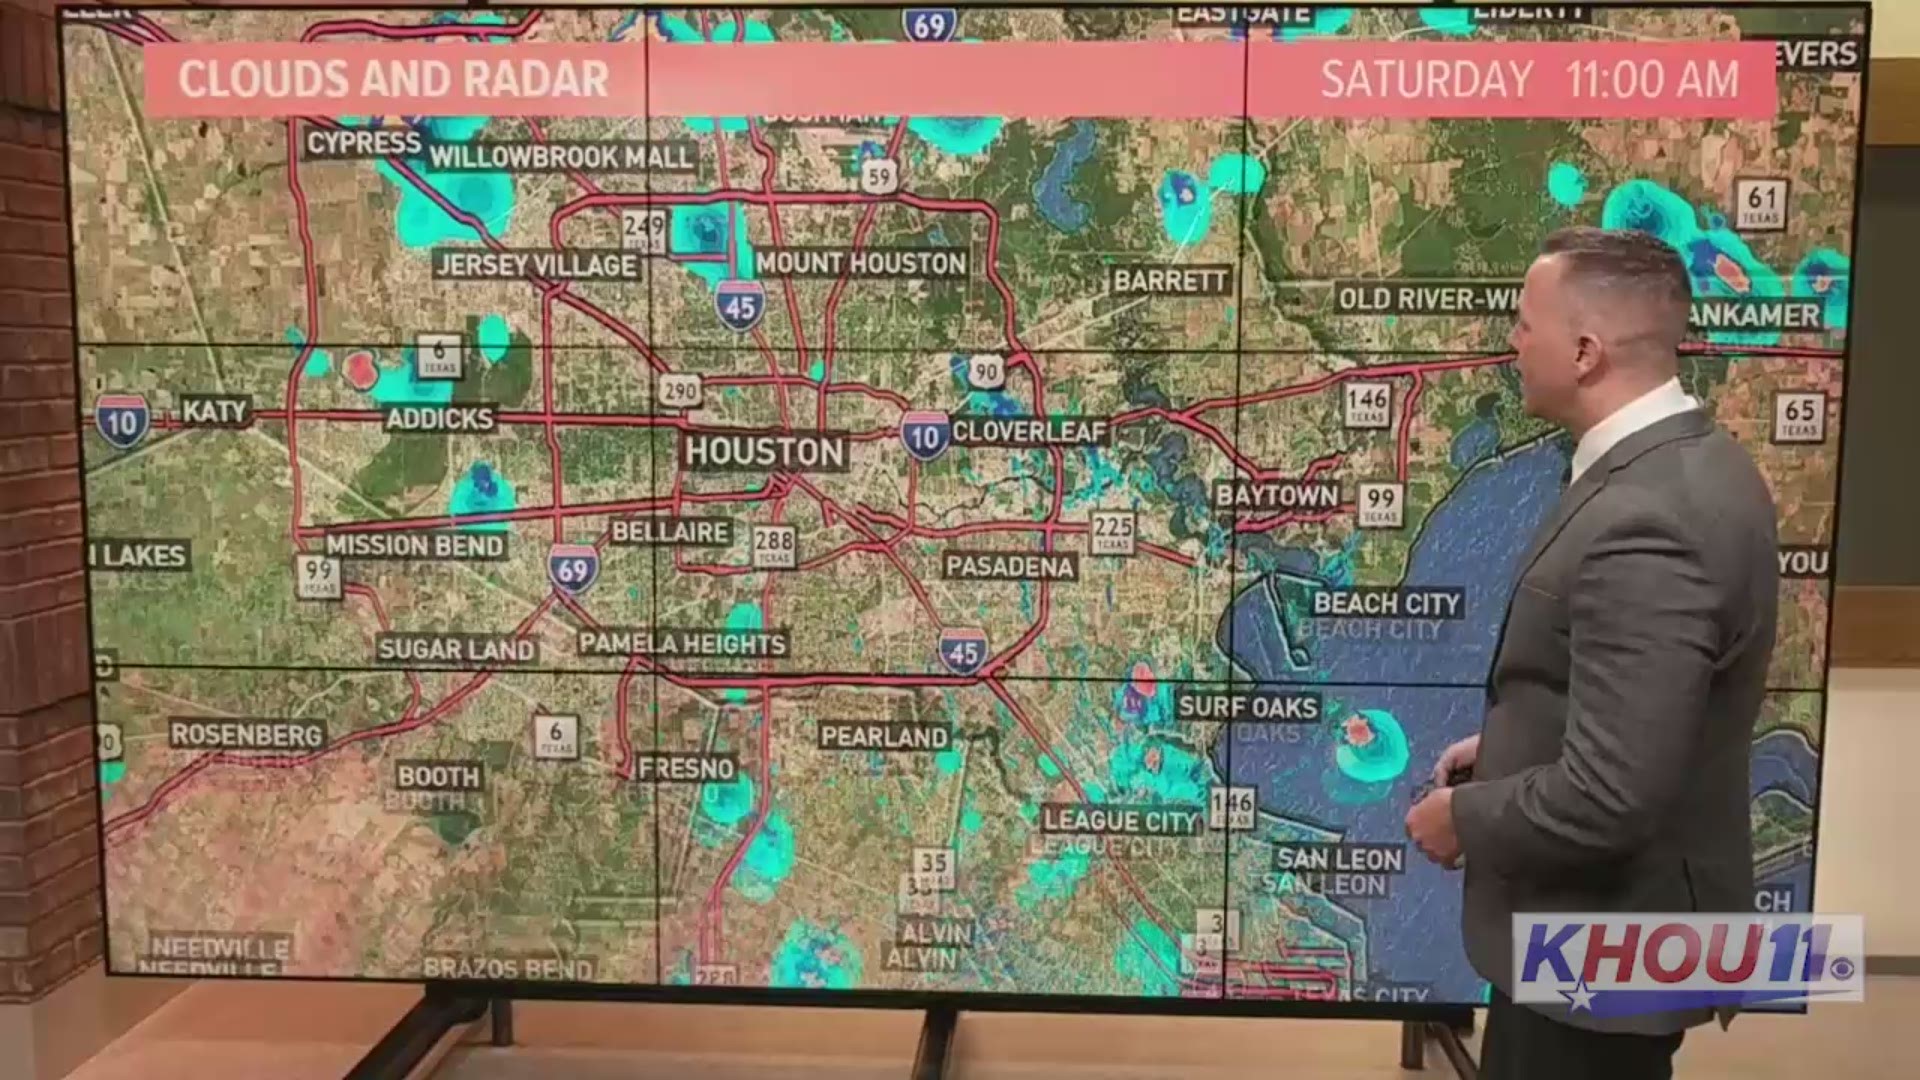 KHOU 11 Meteorologist Blake Mathews has an update on rain expected later today and on Father's Day into Monday